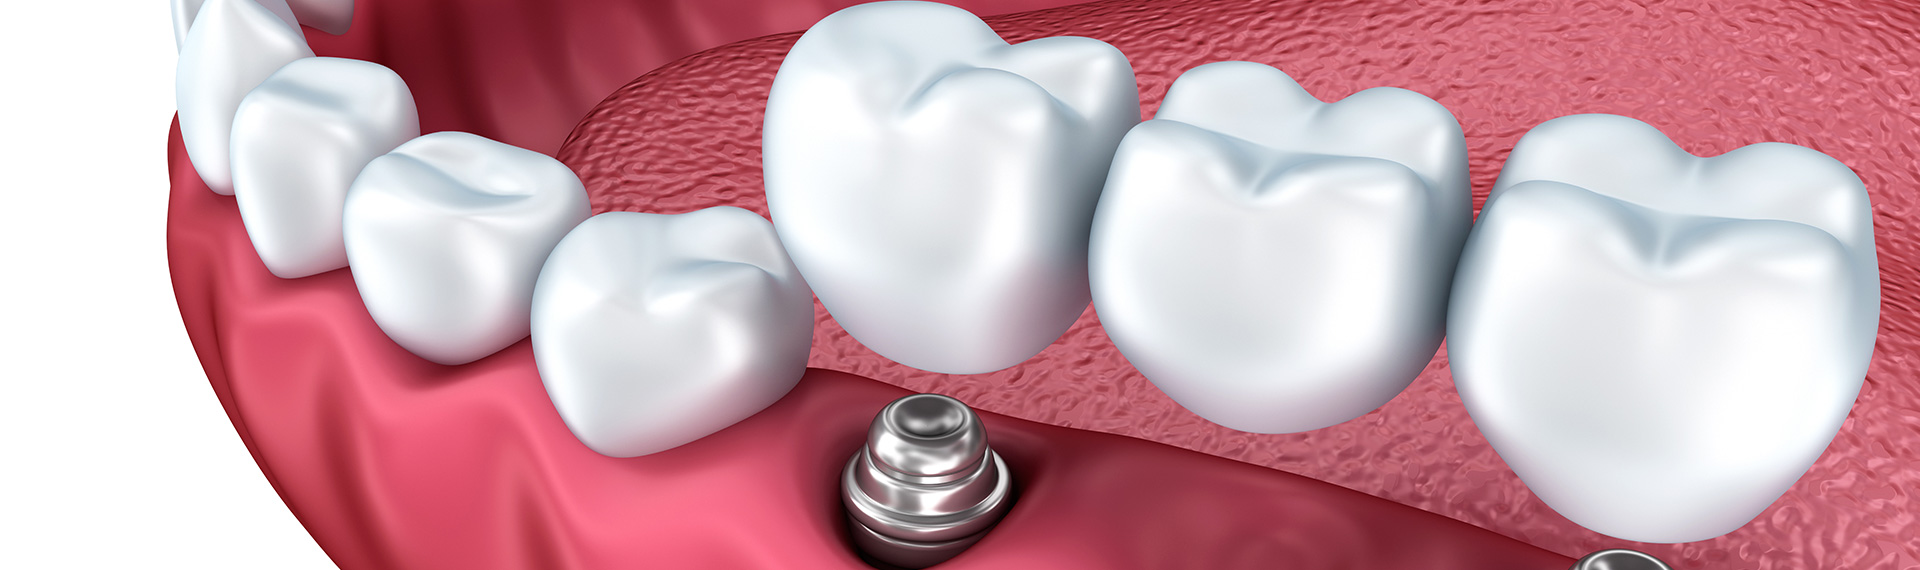 Learn More About Dental Crowns and Bridges Near Me In, Hamilton Ontario Area